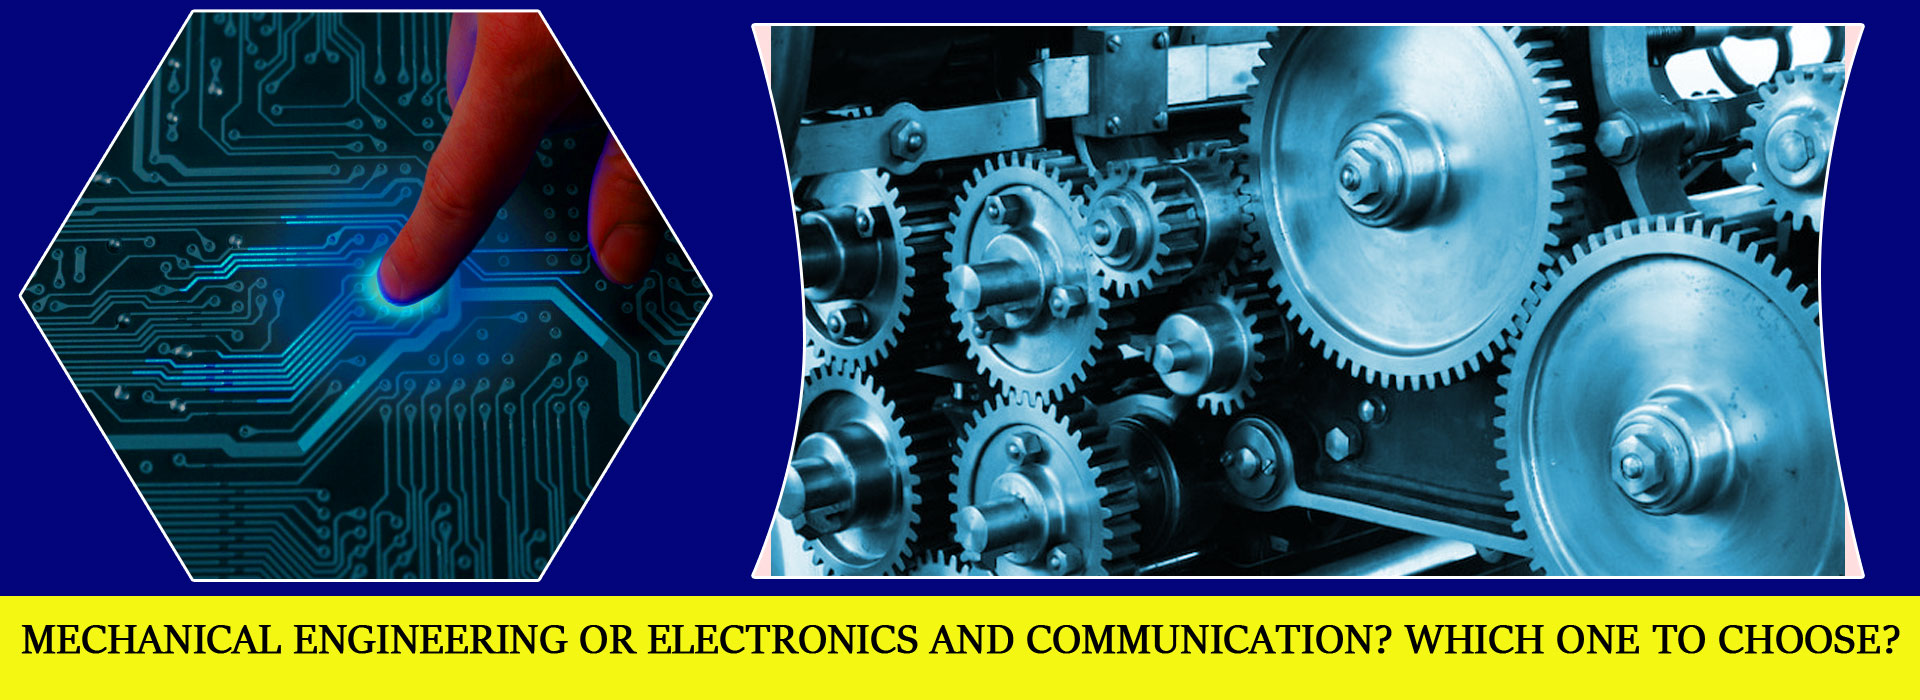 Mechanical or Electronics and Communication Engineering? Which one to choose? 